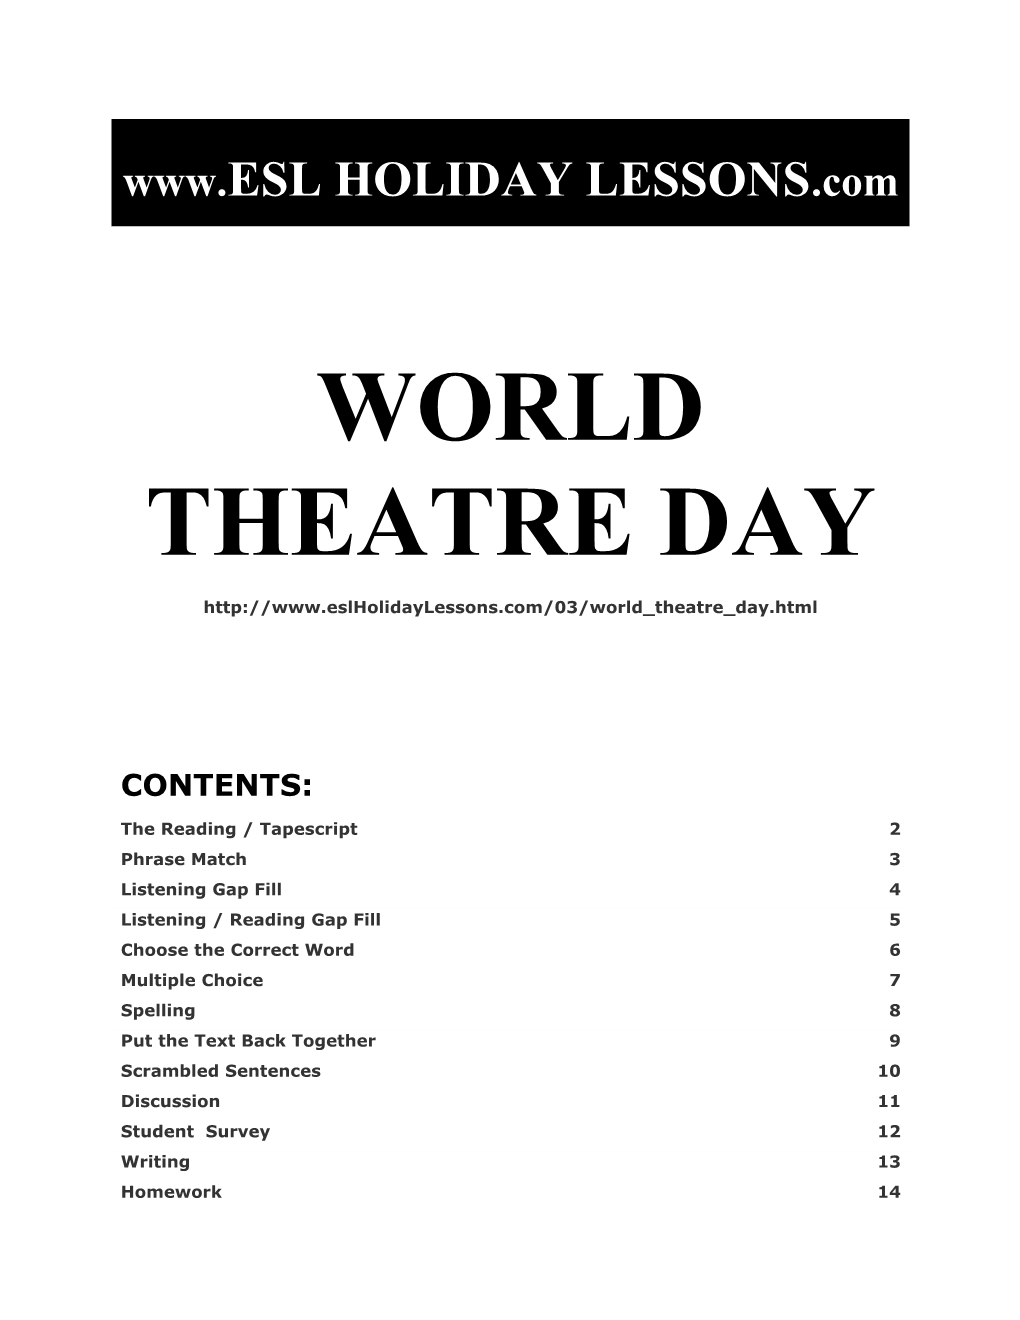 Holiday Lessons - World Theatre Day